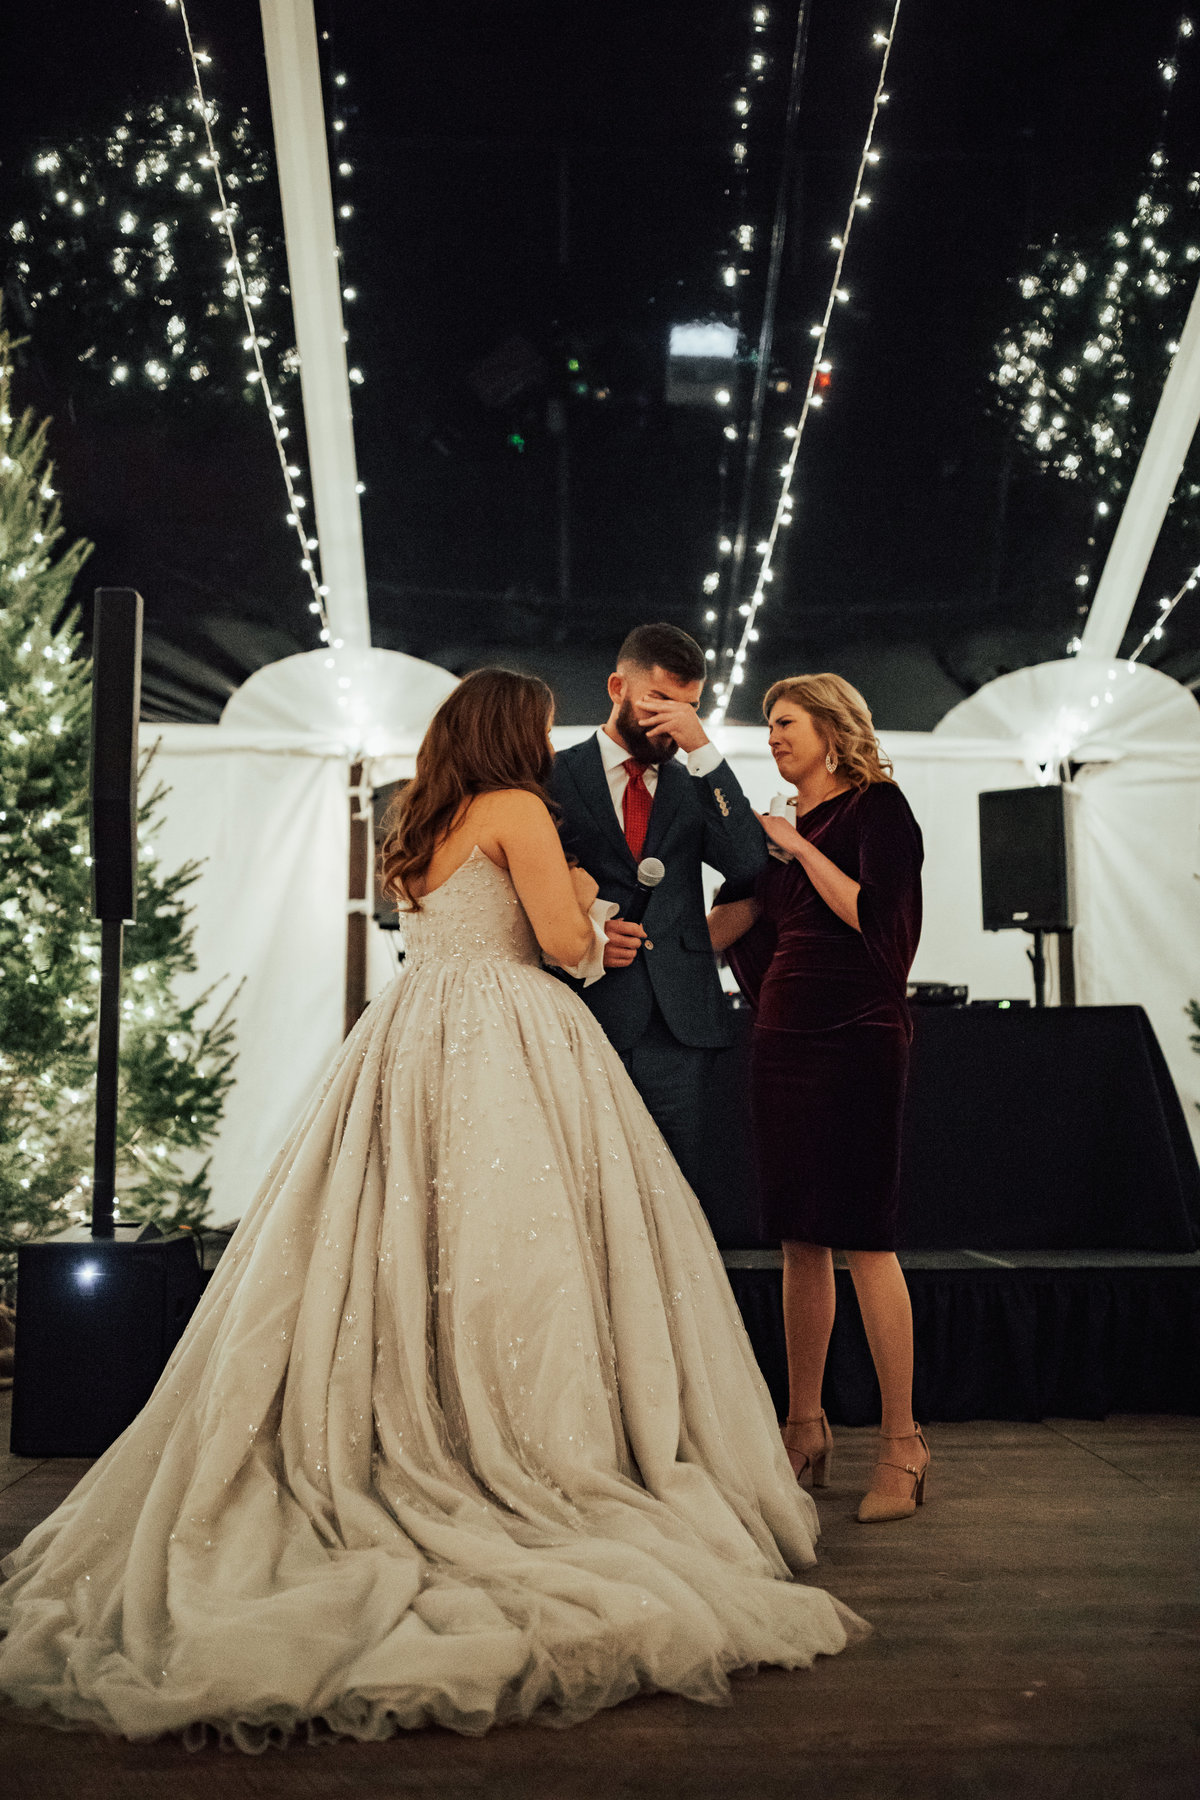 Christy-l-Johnston-Photography-Monica-Relyea-Events-Noelle-Downing-Instagram-Noelle_s-Favorite-Day-Wedding-Battenfelds-Christmas-tree-farm-Red-Hook-New-York-Hudson-Valley-upstate-november-2019-AP1A9727